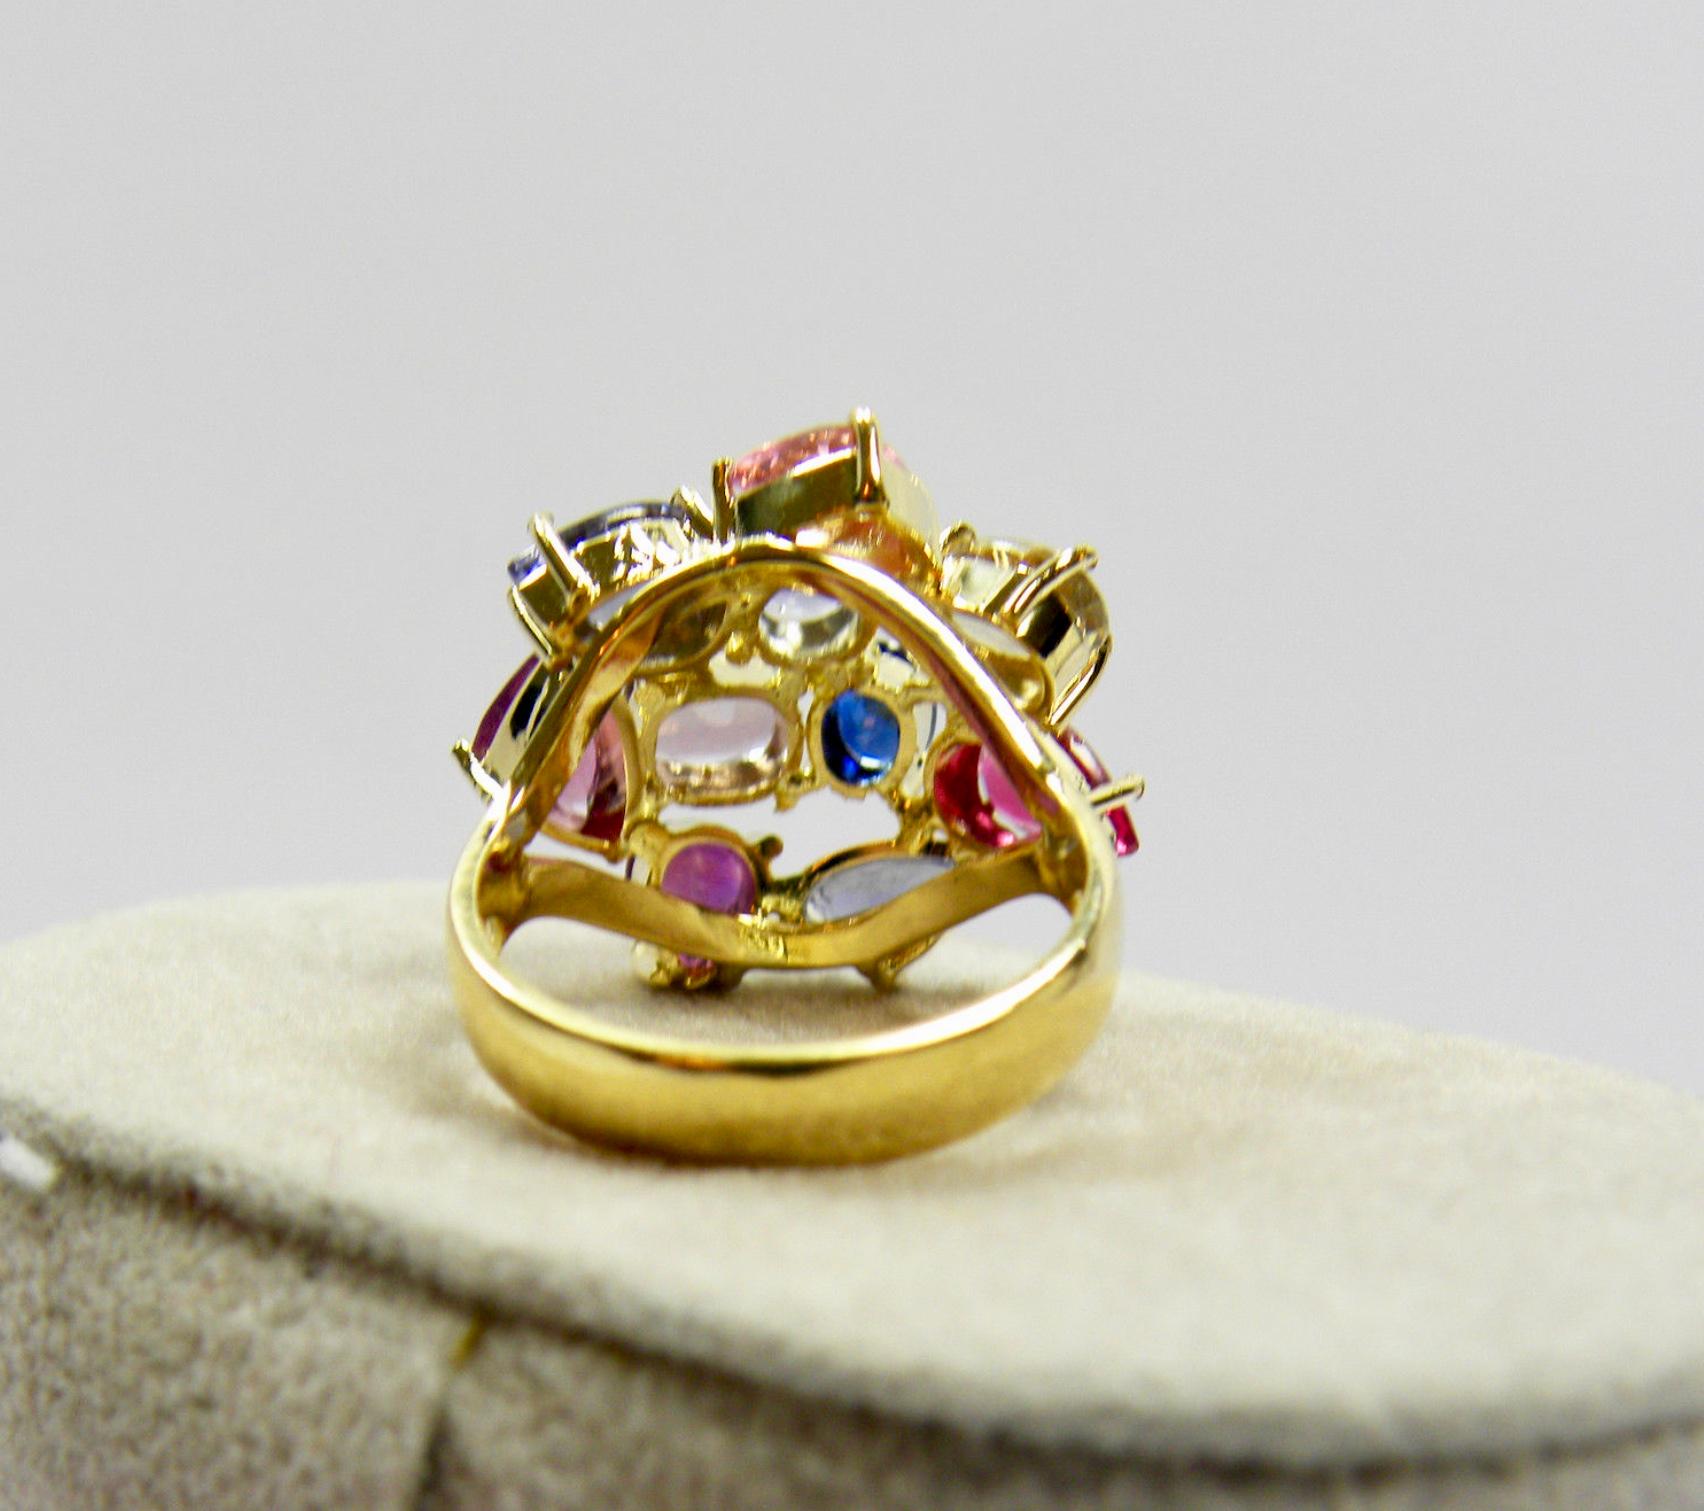 5.67 Carat Untreated Multicolor Sapphire Ring in 18k Yellow Gold 2